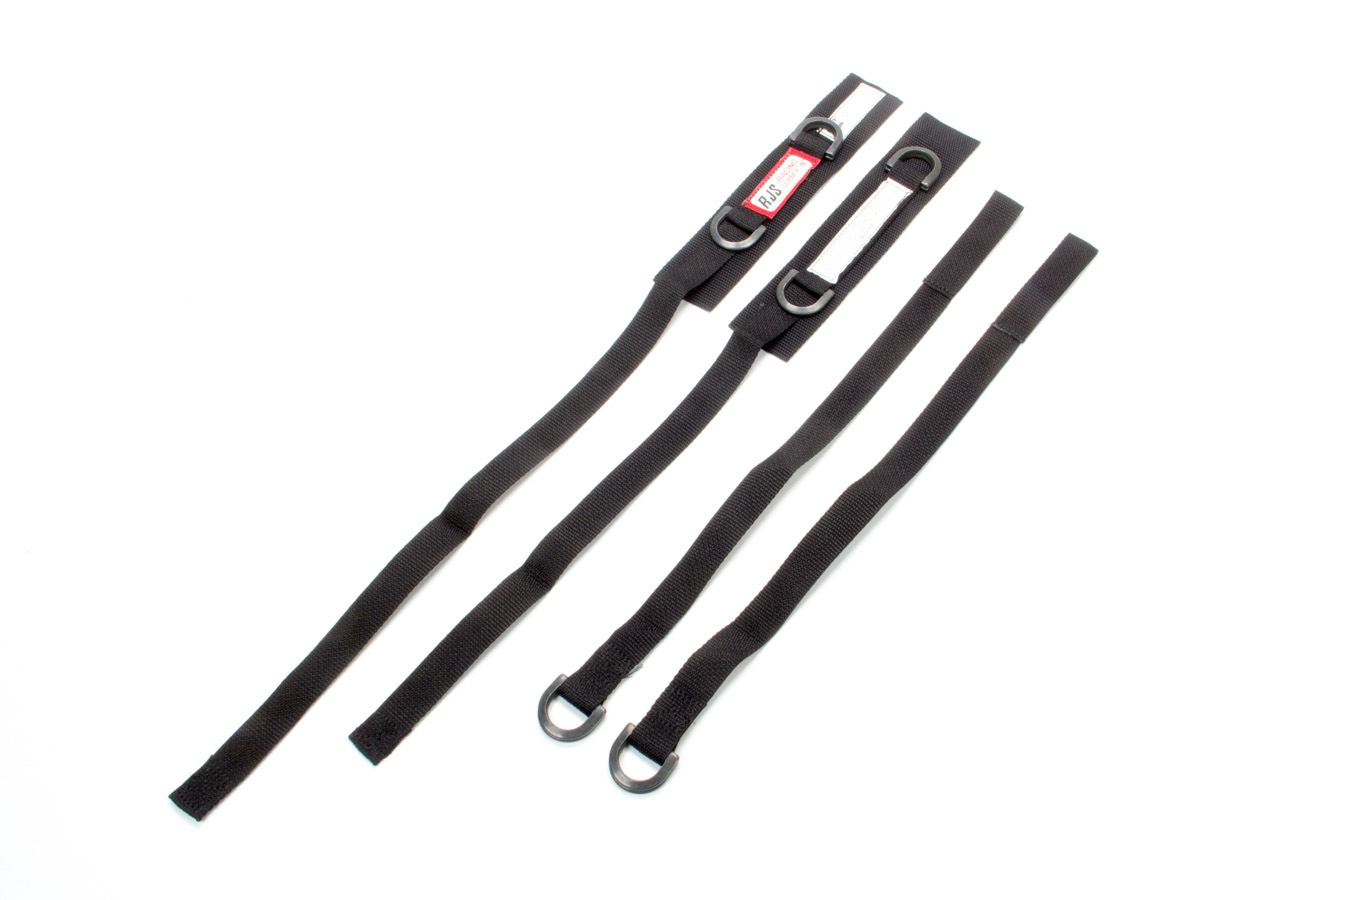 RJS Safety 11000301 - Arm Restraint Harness, SFI 3.3, Individual Straps, 1 in D-Ring, Black, Pair